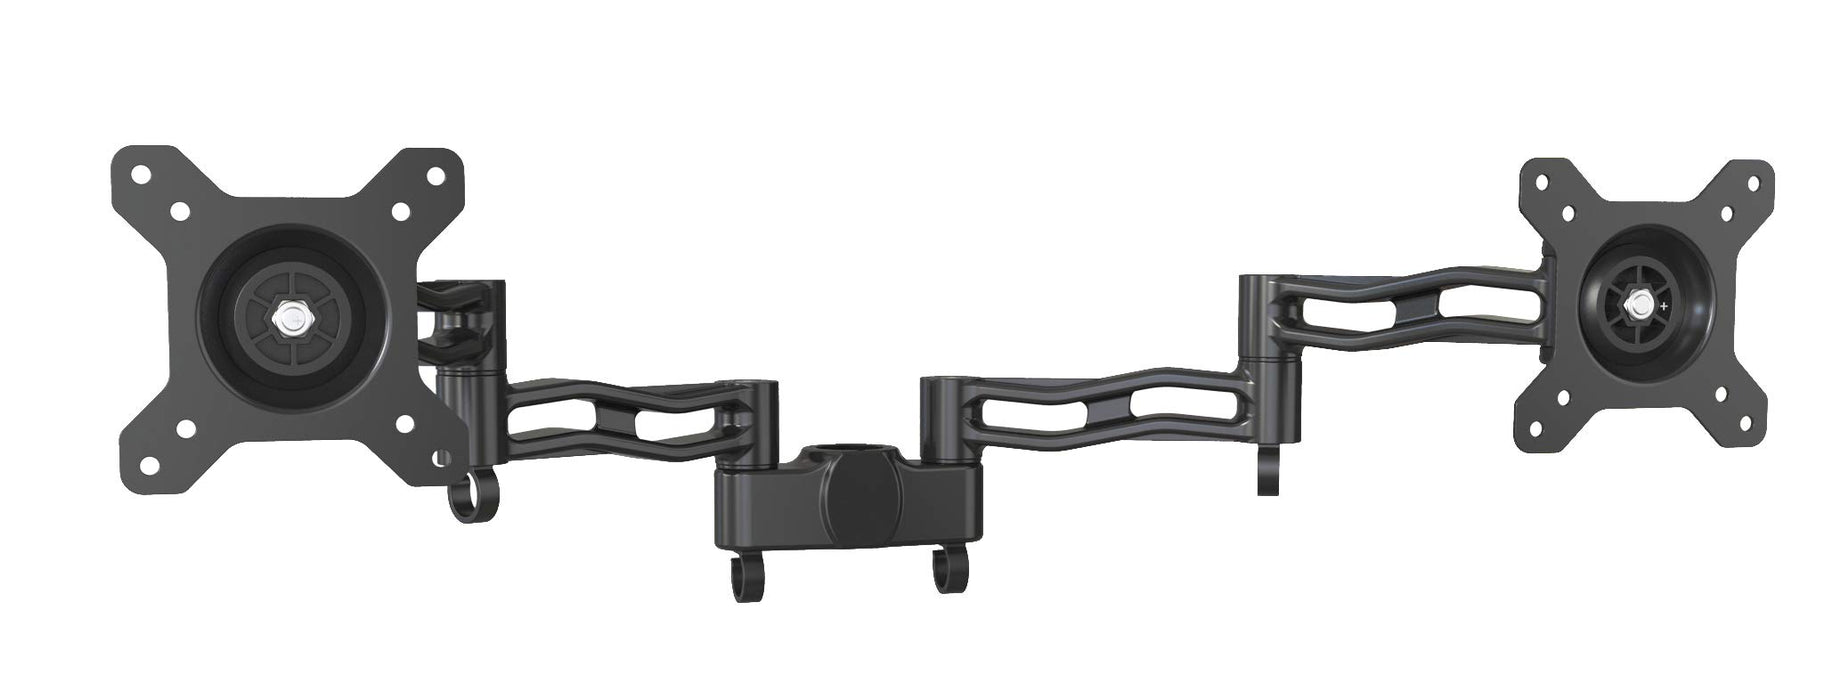 Duronic Dual Spare Arm Set DM35P2 | Two DM35 Arms with VESA Heads | Dual Joint Screen Arms | Compatible with All Duronic Monitor Desk Mounts & Poles | BLACK | Aluminium | Part of the DM35 Range